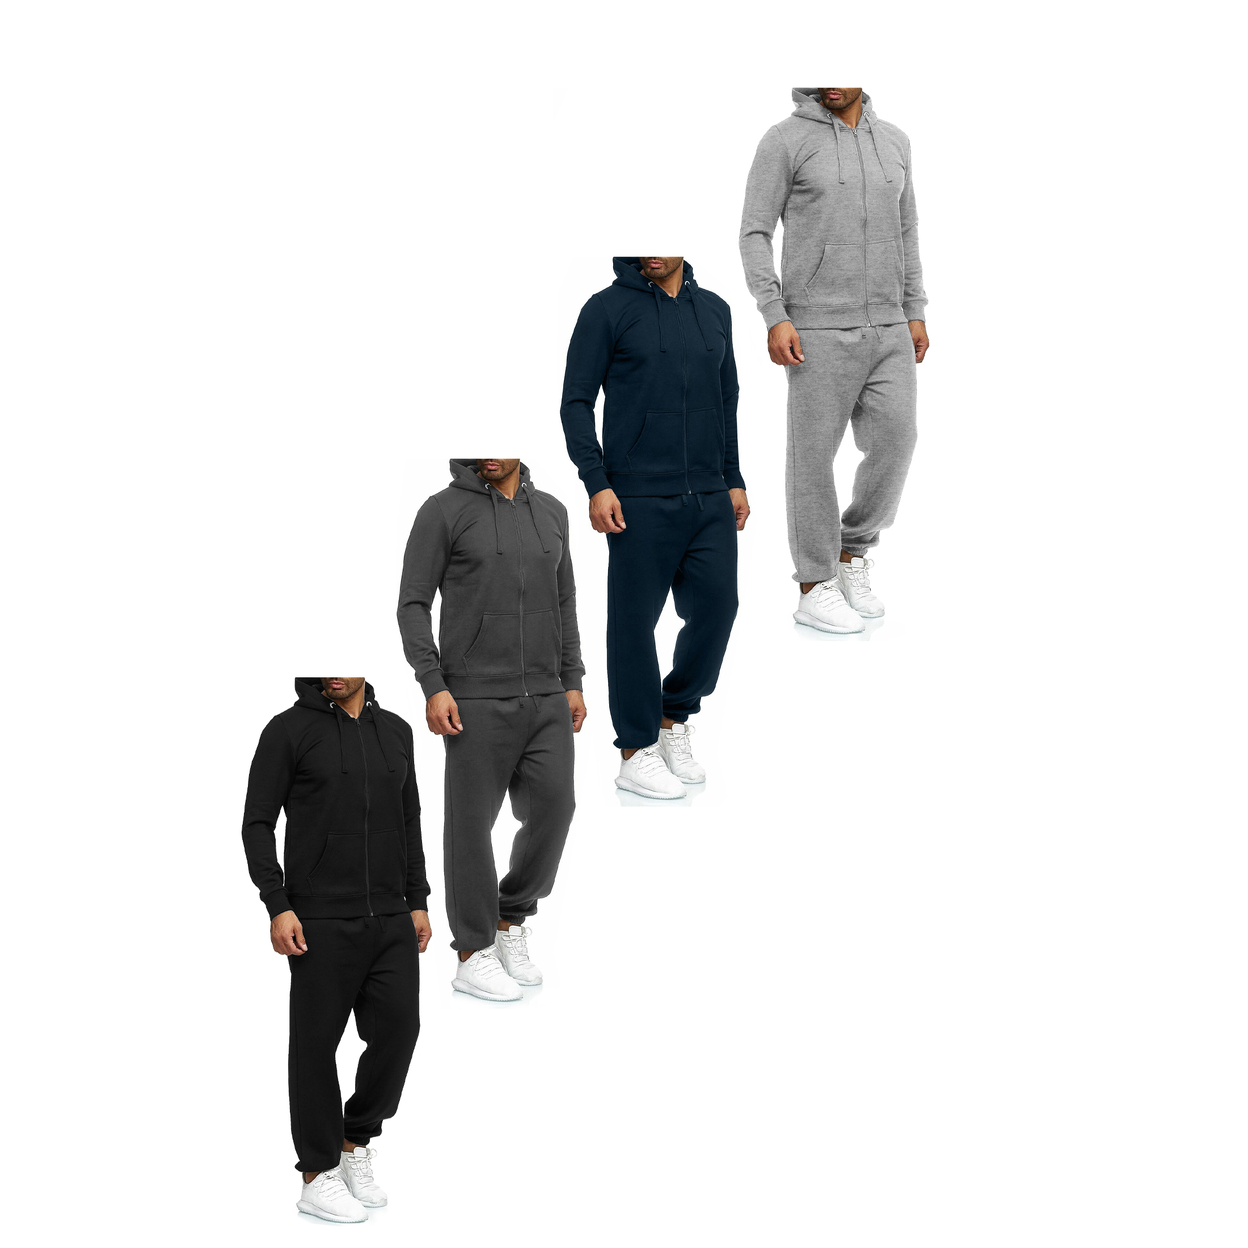 2-Pack: Men's Casual Big & Tall Athletic Active Winter Warm Fleece Lined Full Zip Tracksuit Jogger Set - Grey, Xx-large